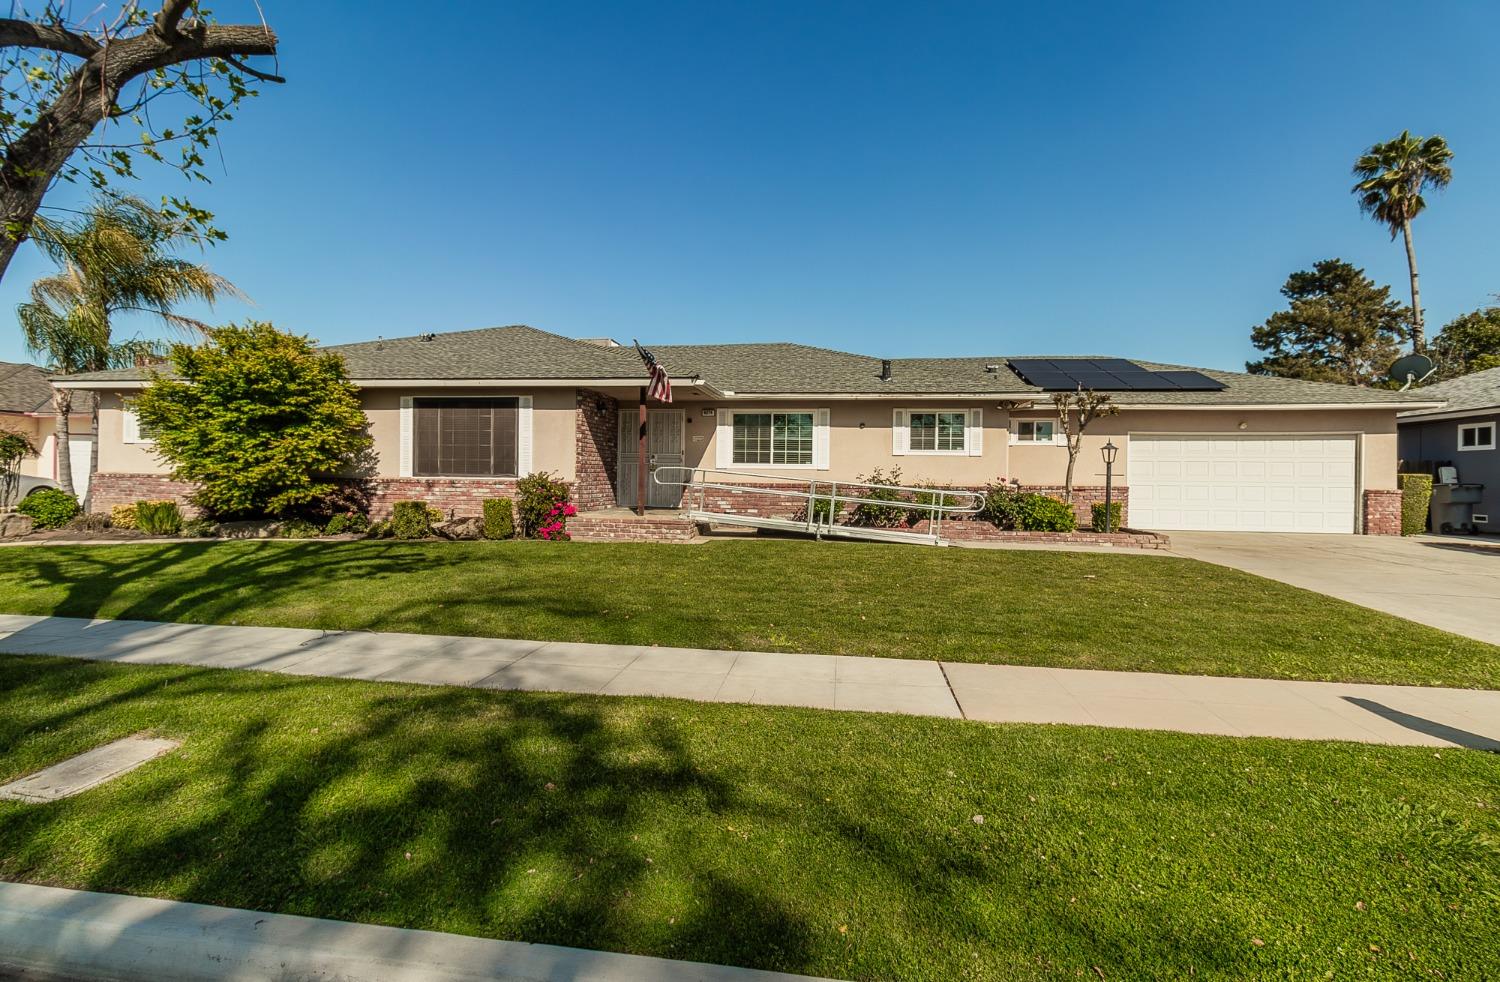 Photo of 6274 N Sharon Ave in Fresno, CA